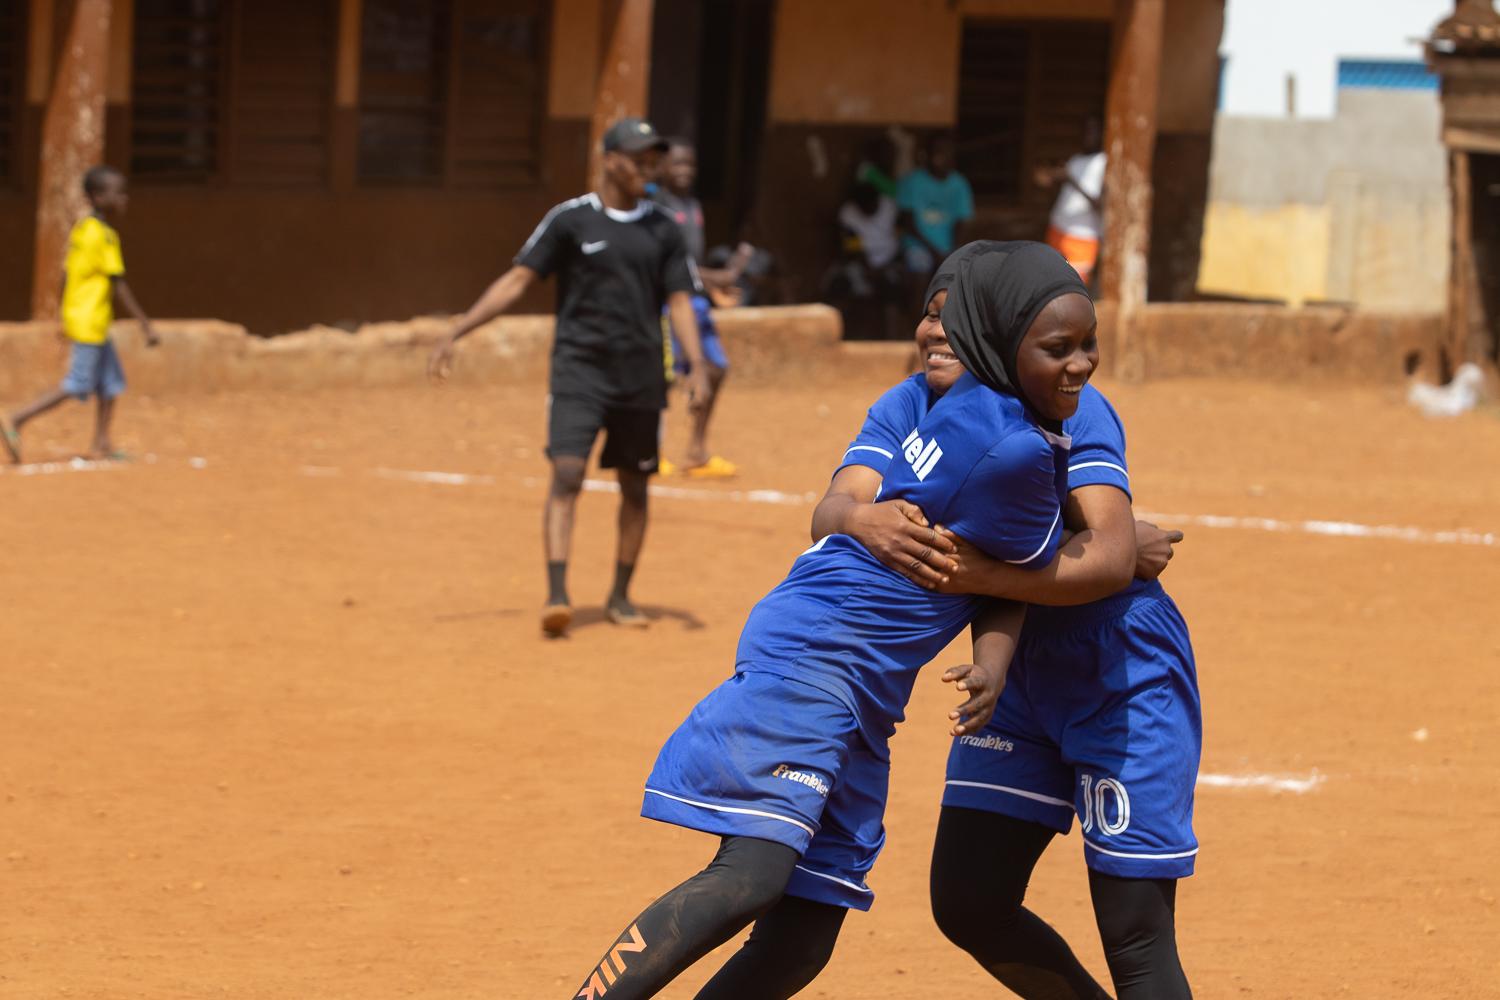 Image from Faith and Football - Two girls celebrate a win during the 'hijab...